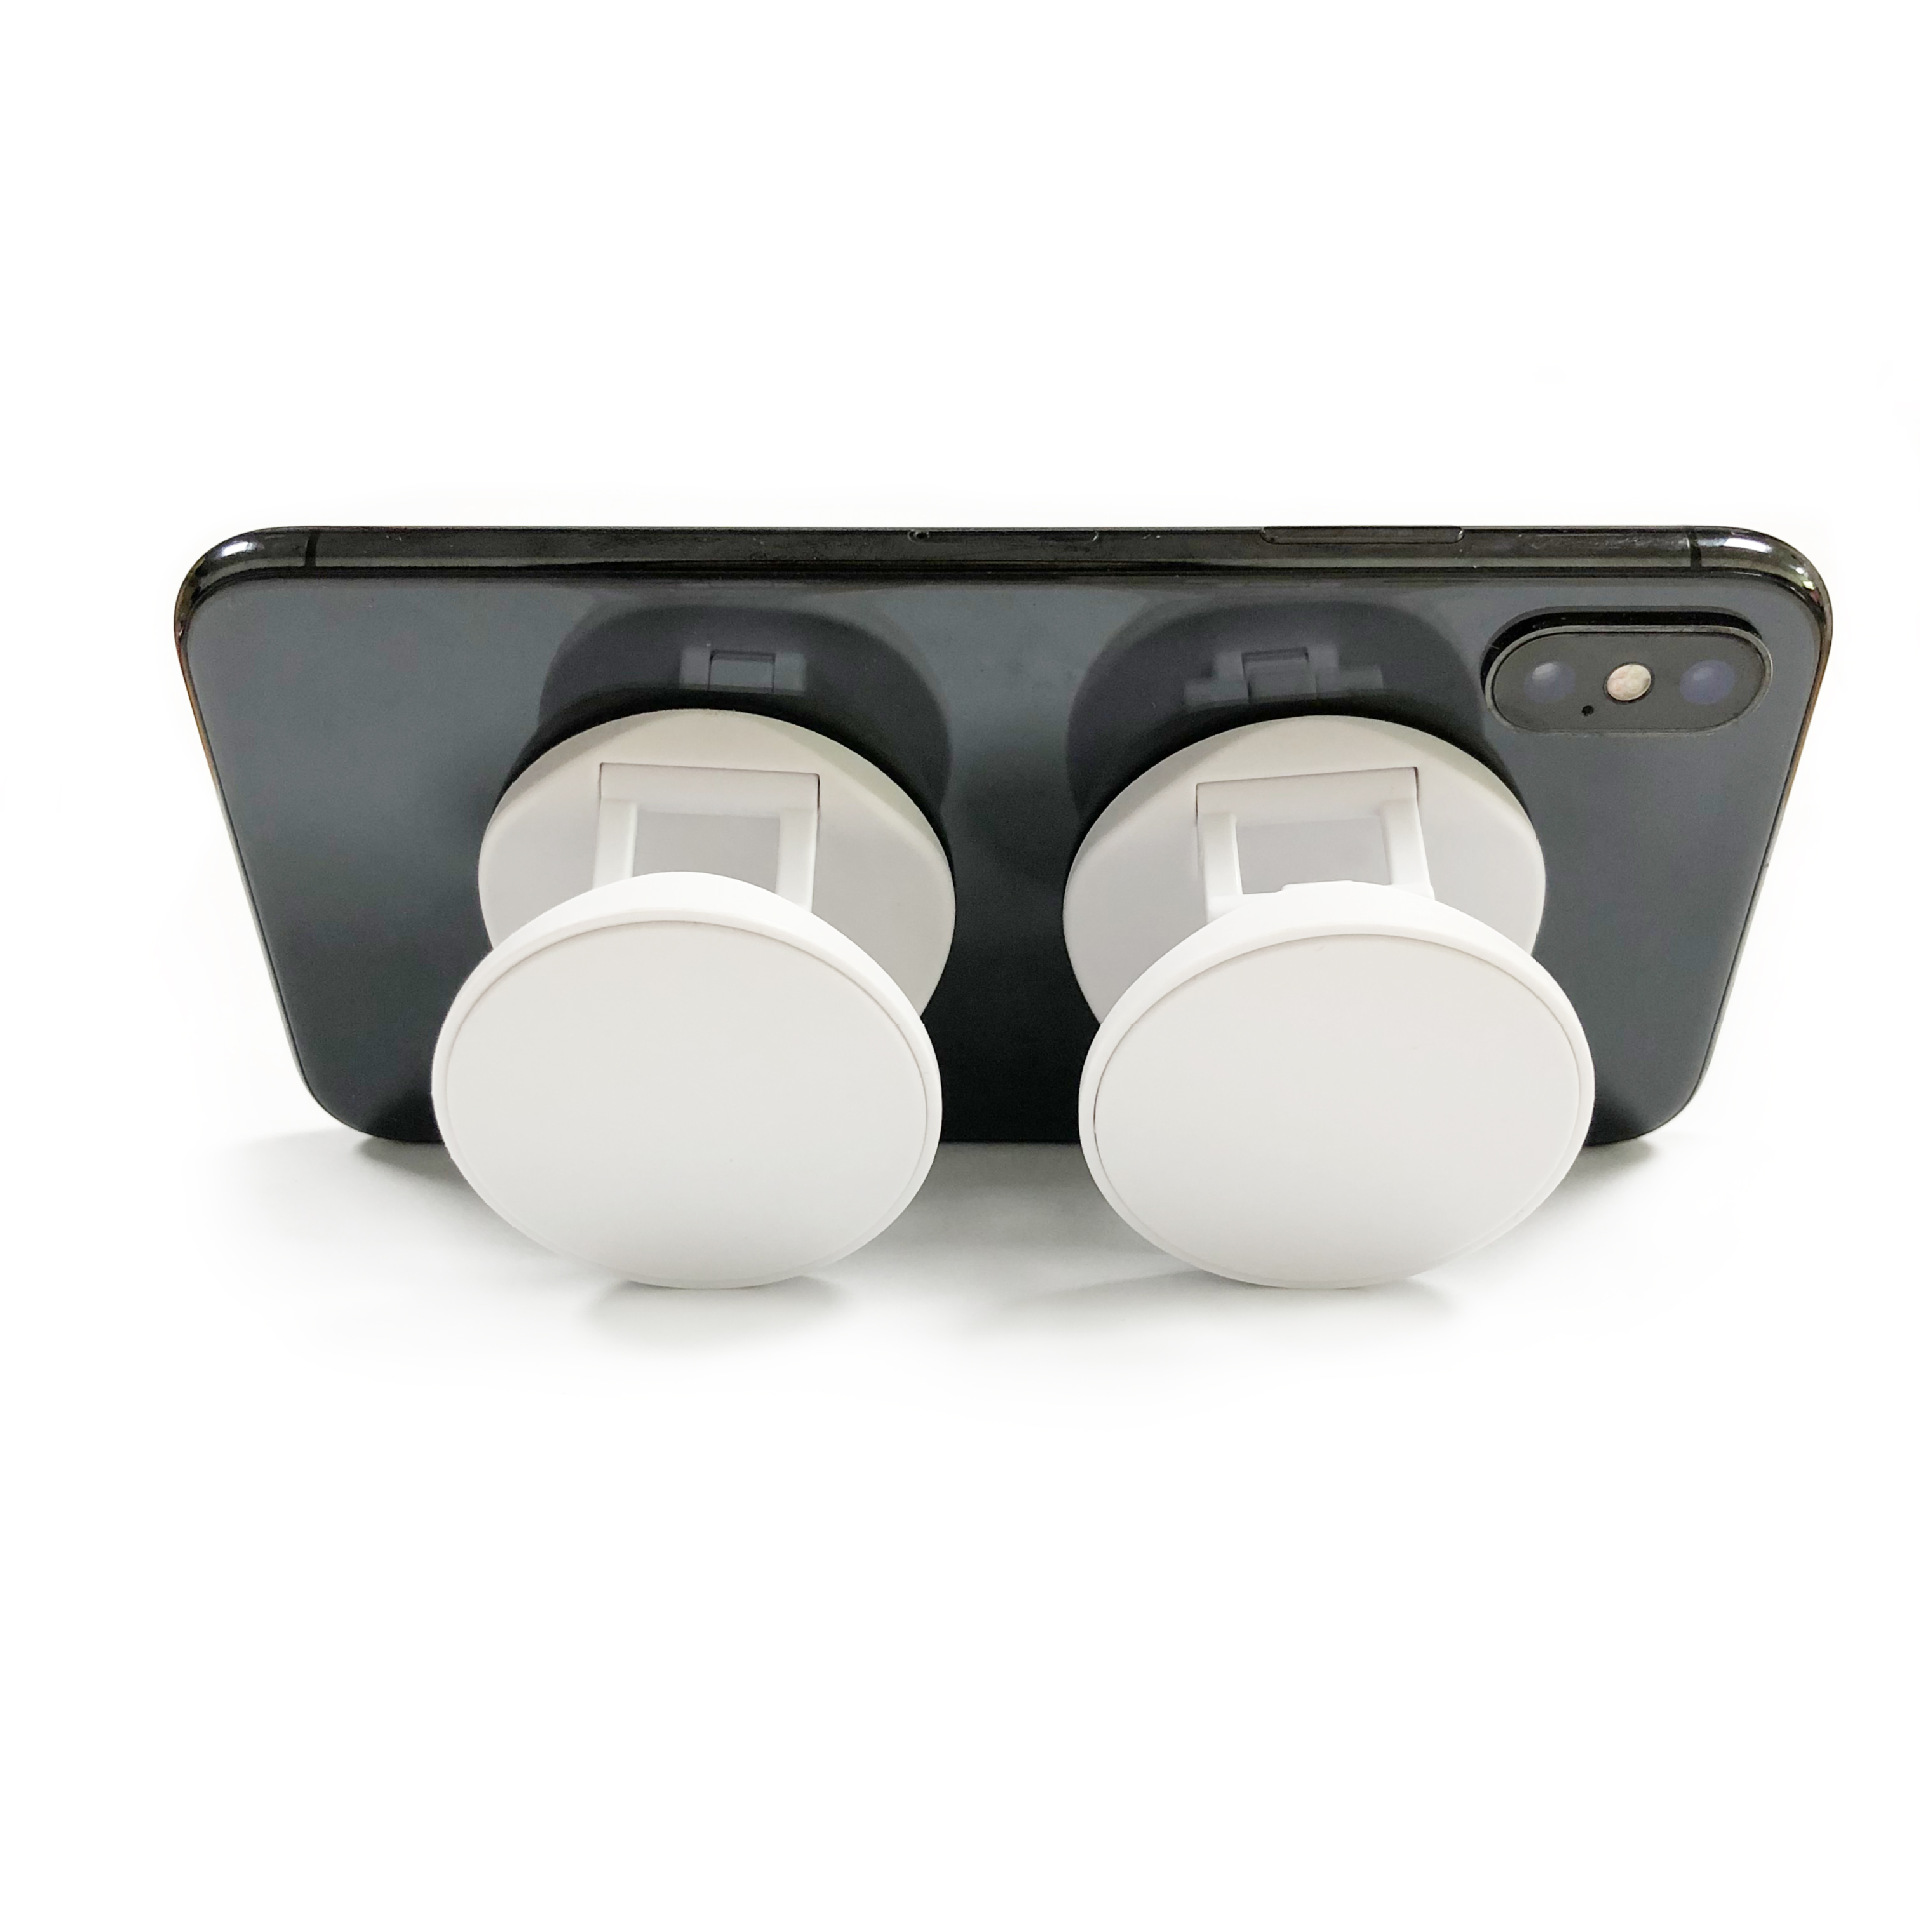 Legs Round Phone Stand and Holder